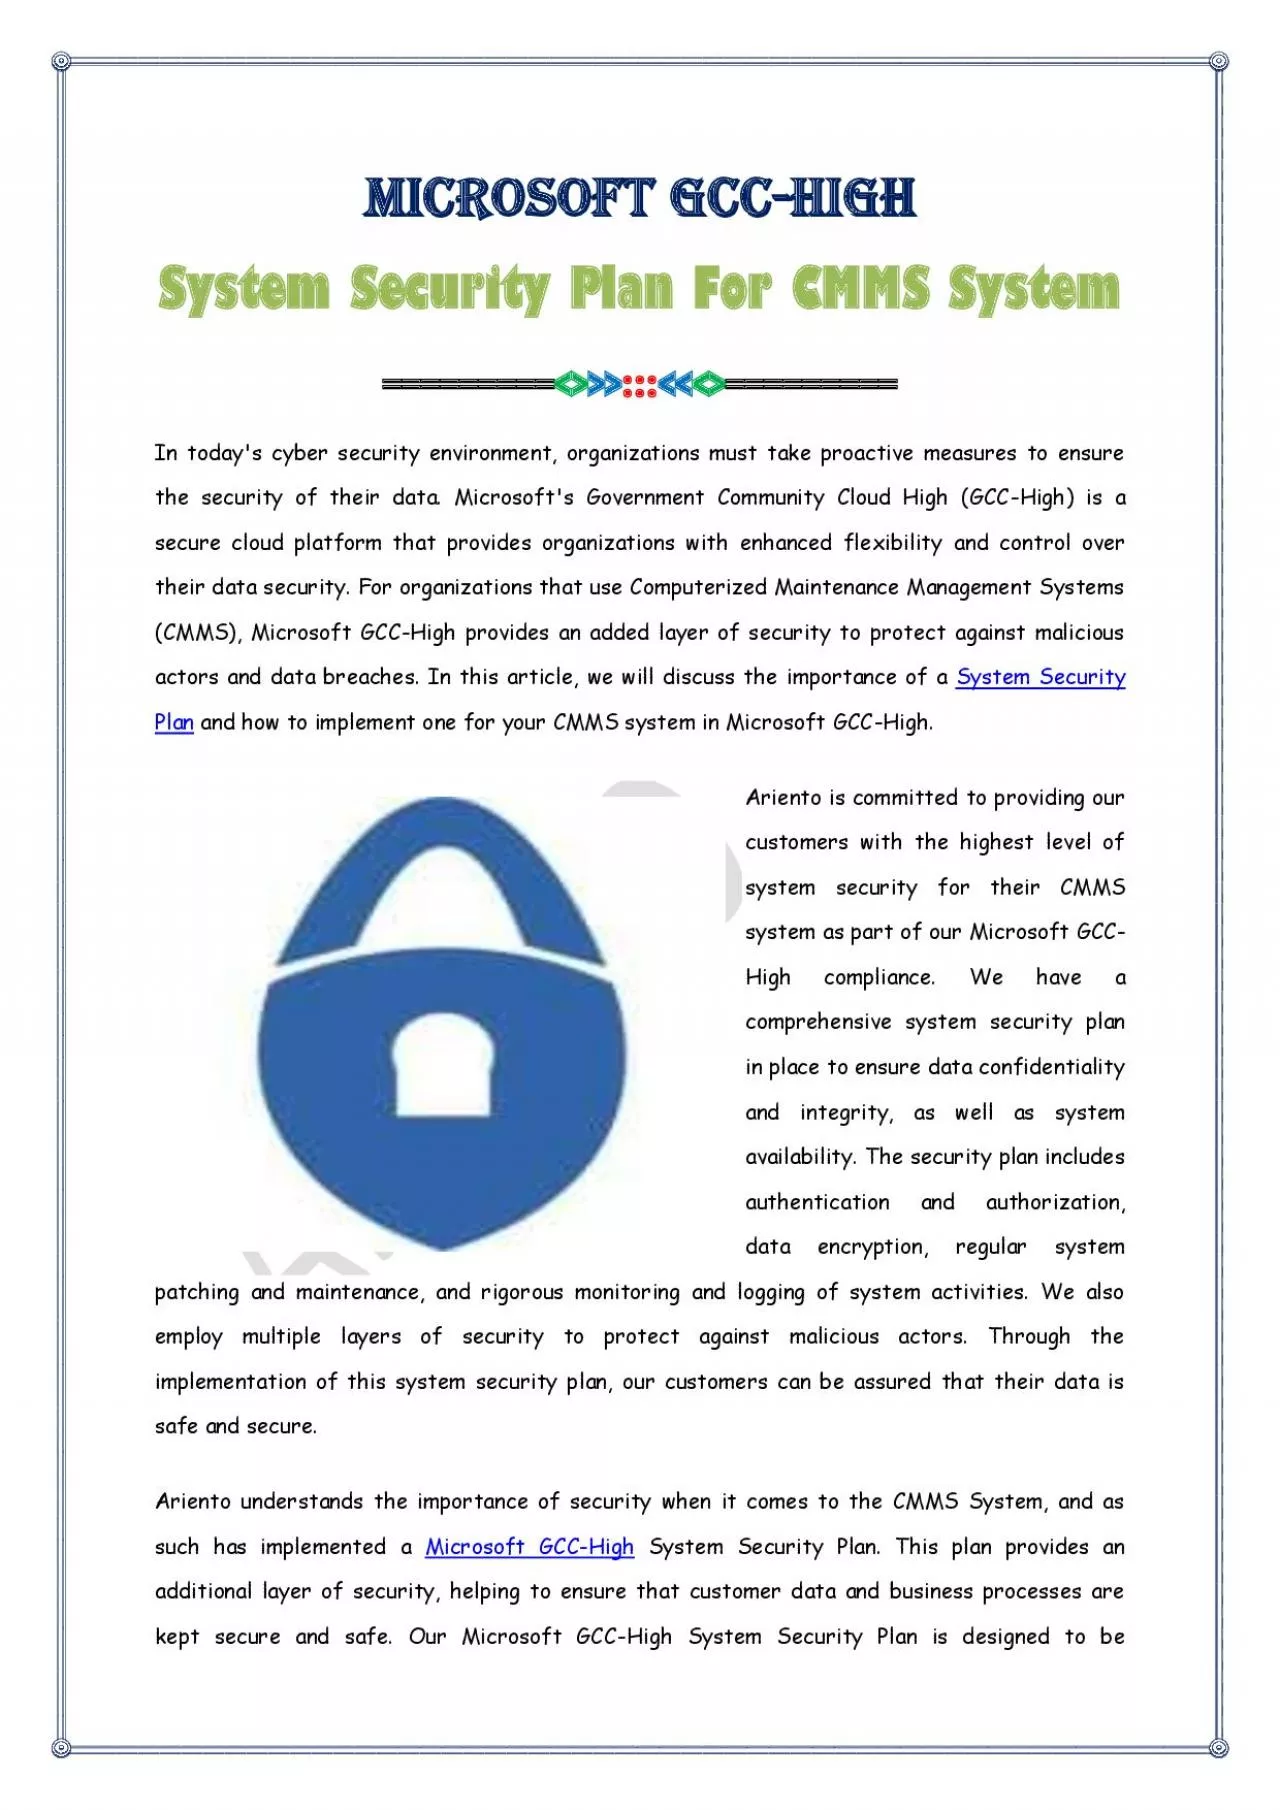 System Security Plan For CMMS System